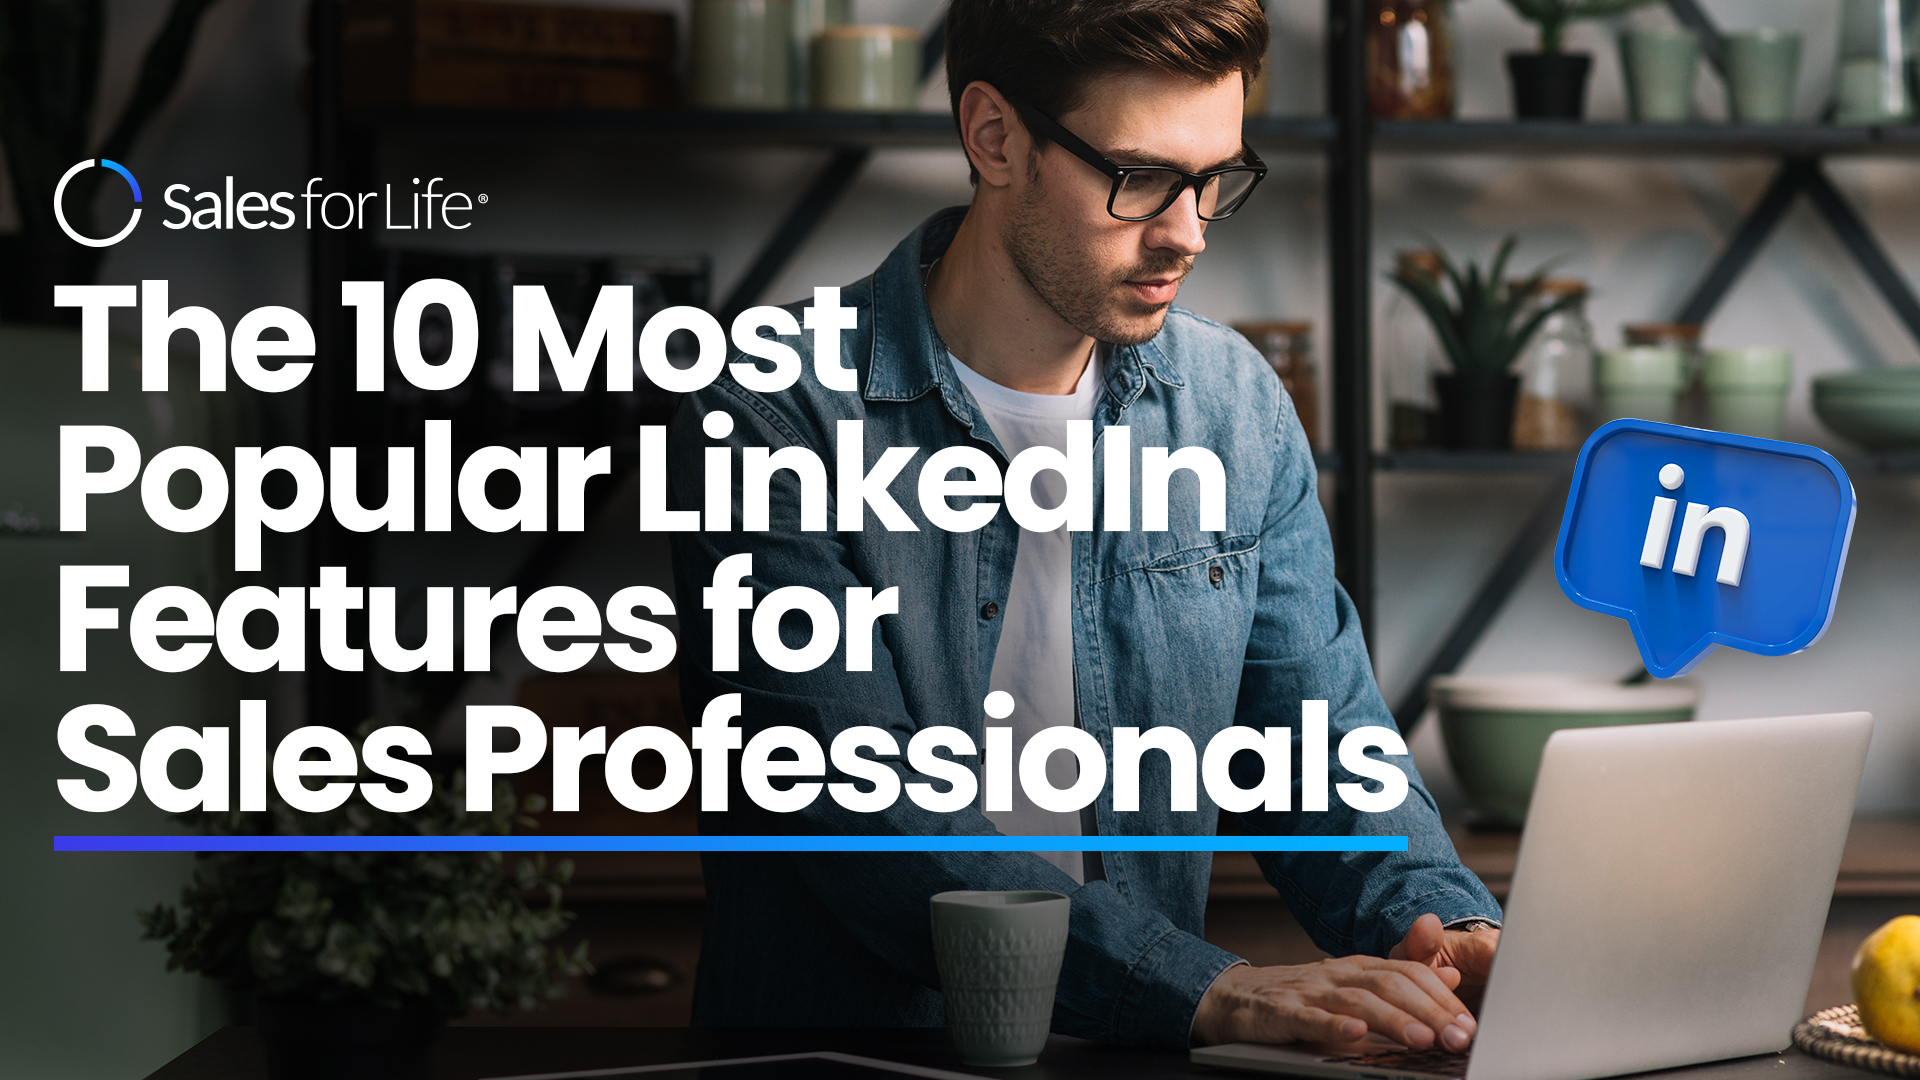 The 10 Most Popular LinkedIn Features for Sales Professionals